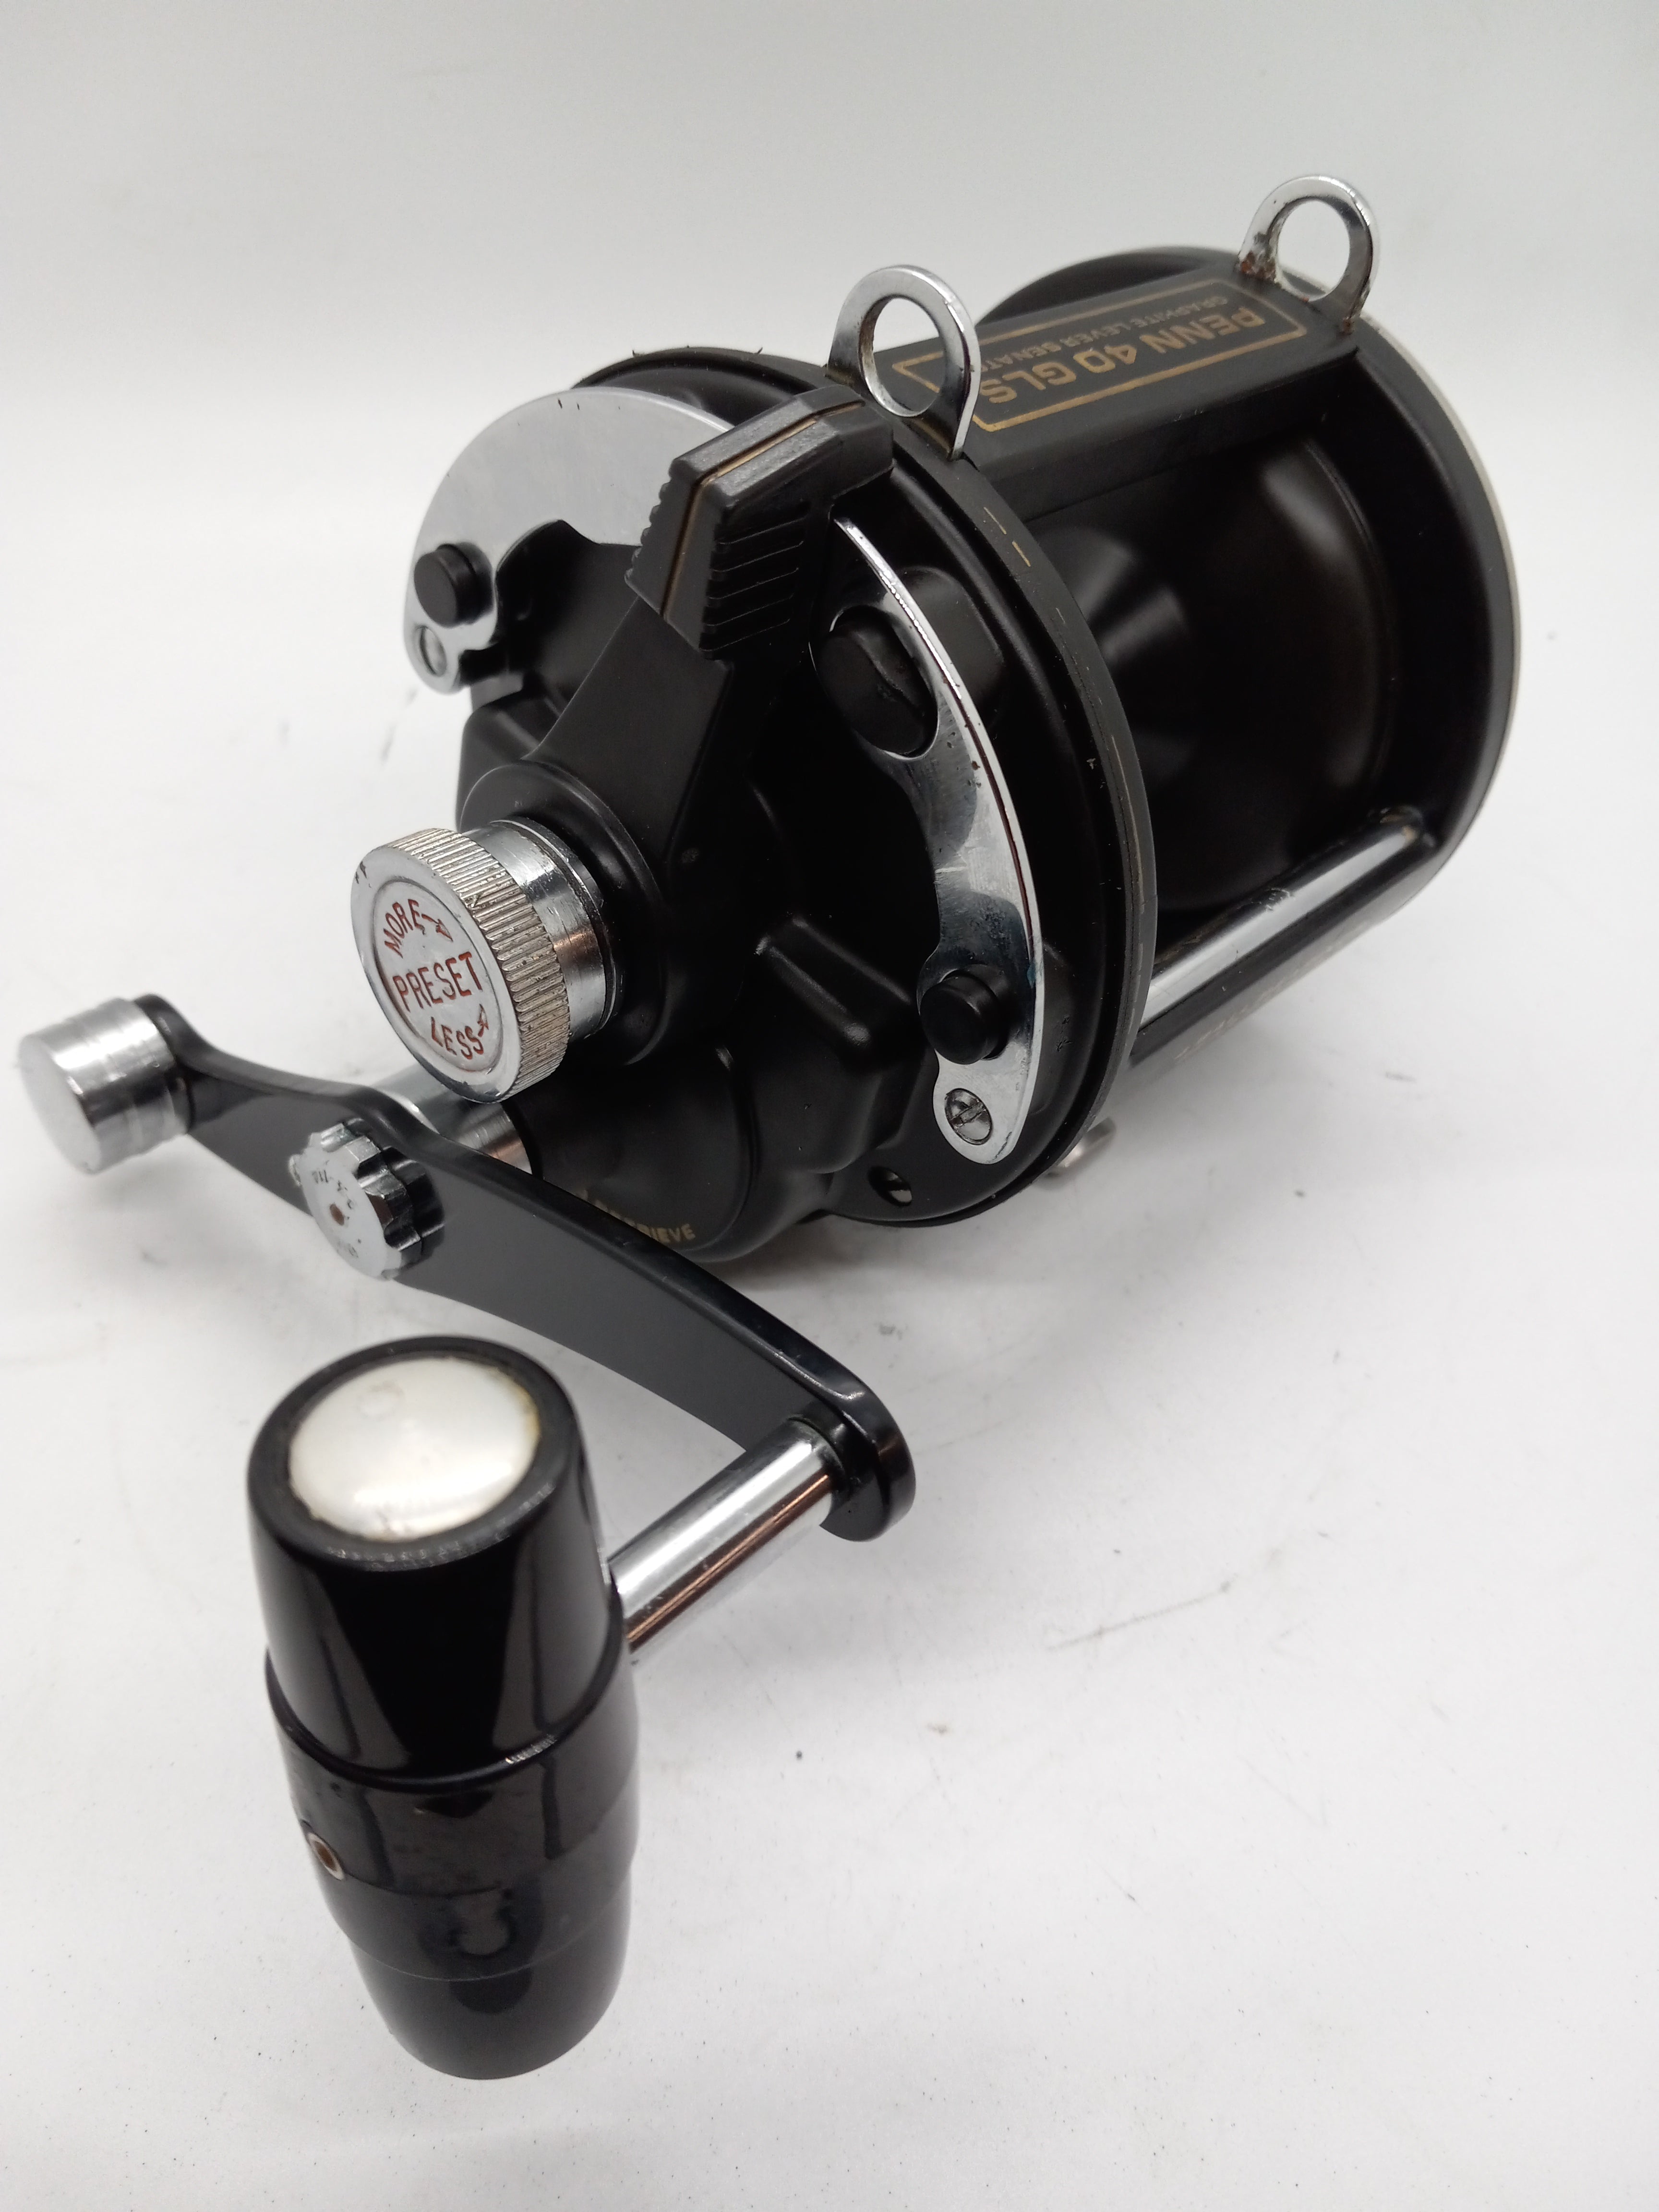 Penn 4400 SS spinning reel, made in USA, cleaned and lubed